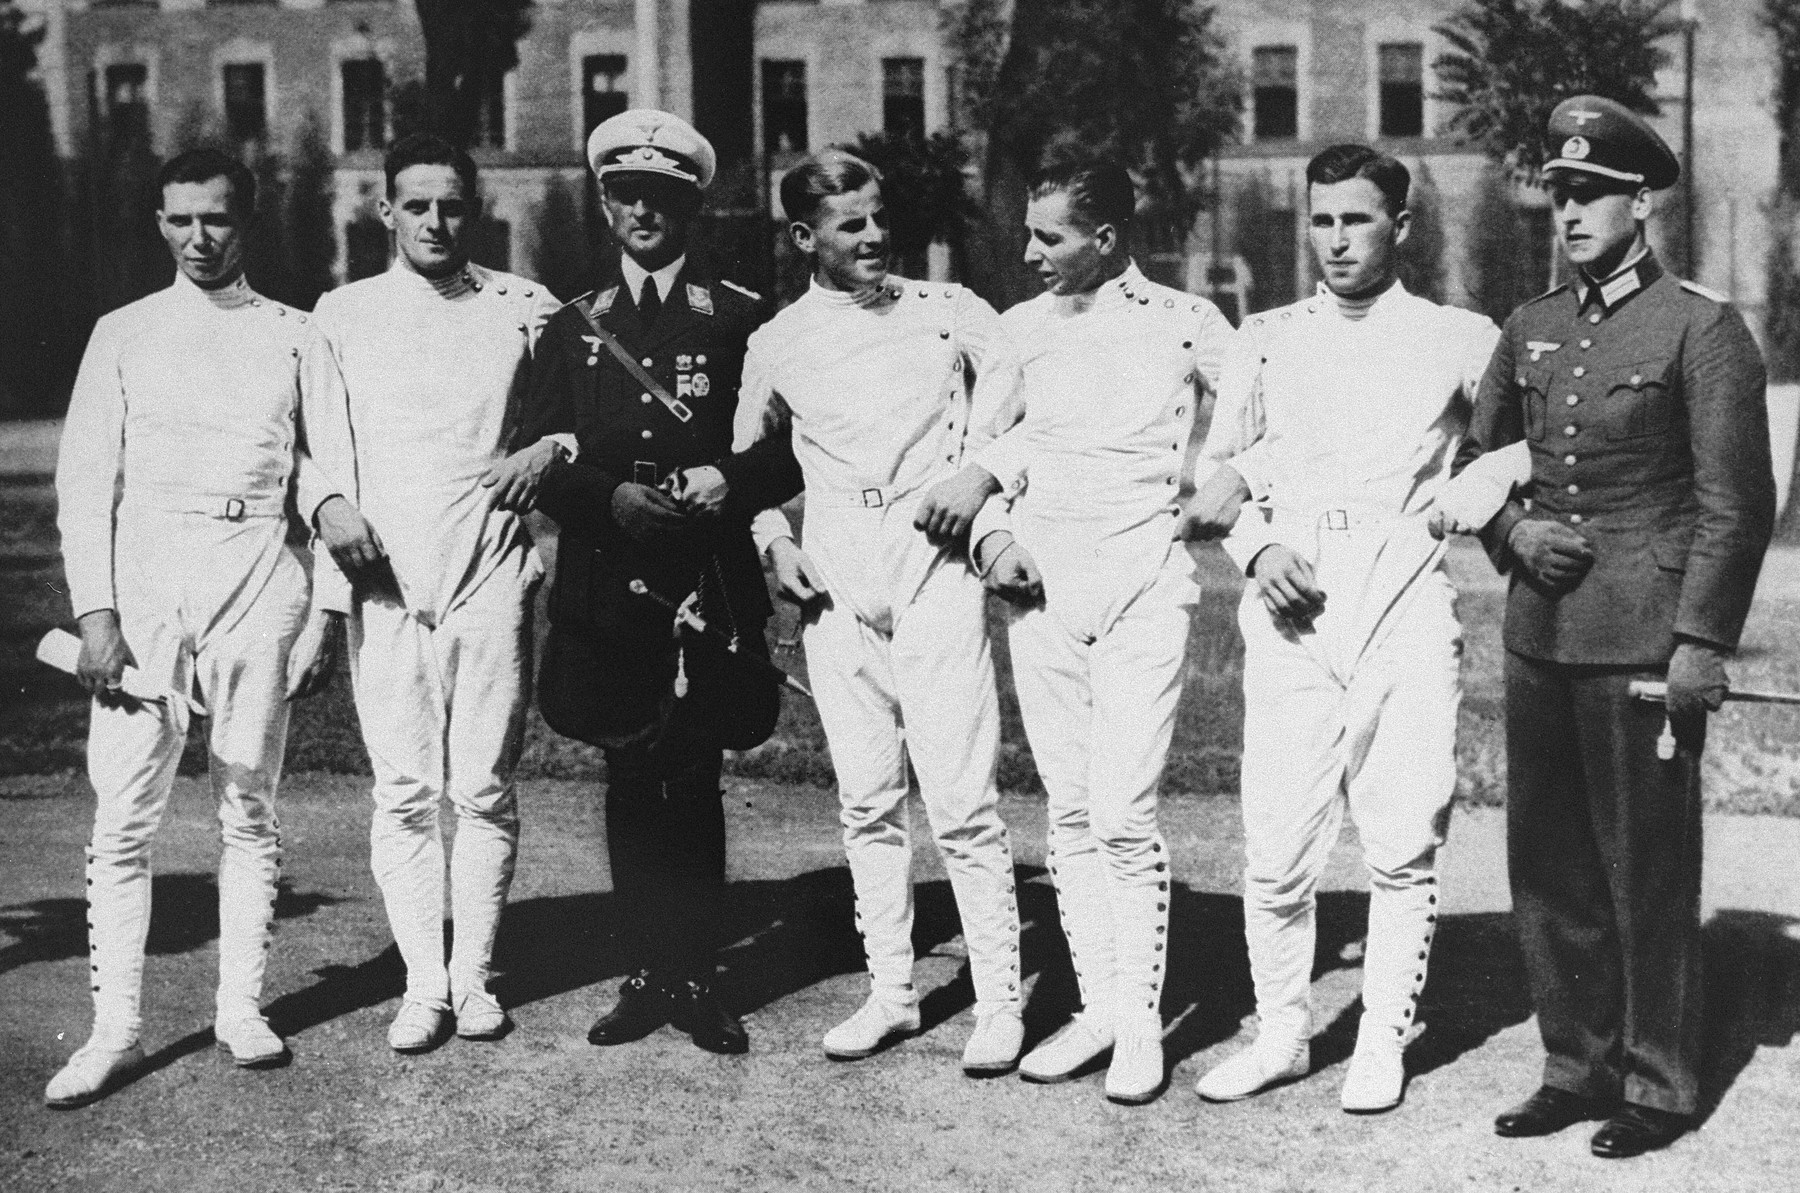 Group portrait of the members of the German Pentathalon team after their victory in Budapest.  This victory qualified the team to compete at the 1936 Berlin Olympics.

Pictured here, from left to right, are Oberlt. Birk, Oberlt. Handrick, Hauptmn. Heigl, Lt. Puttmann, Lt. Lemp, and Lt. Schreiber.